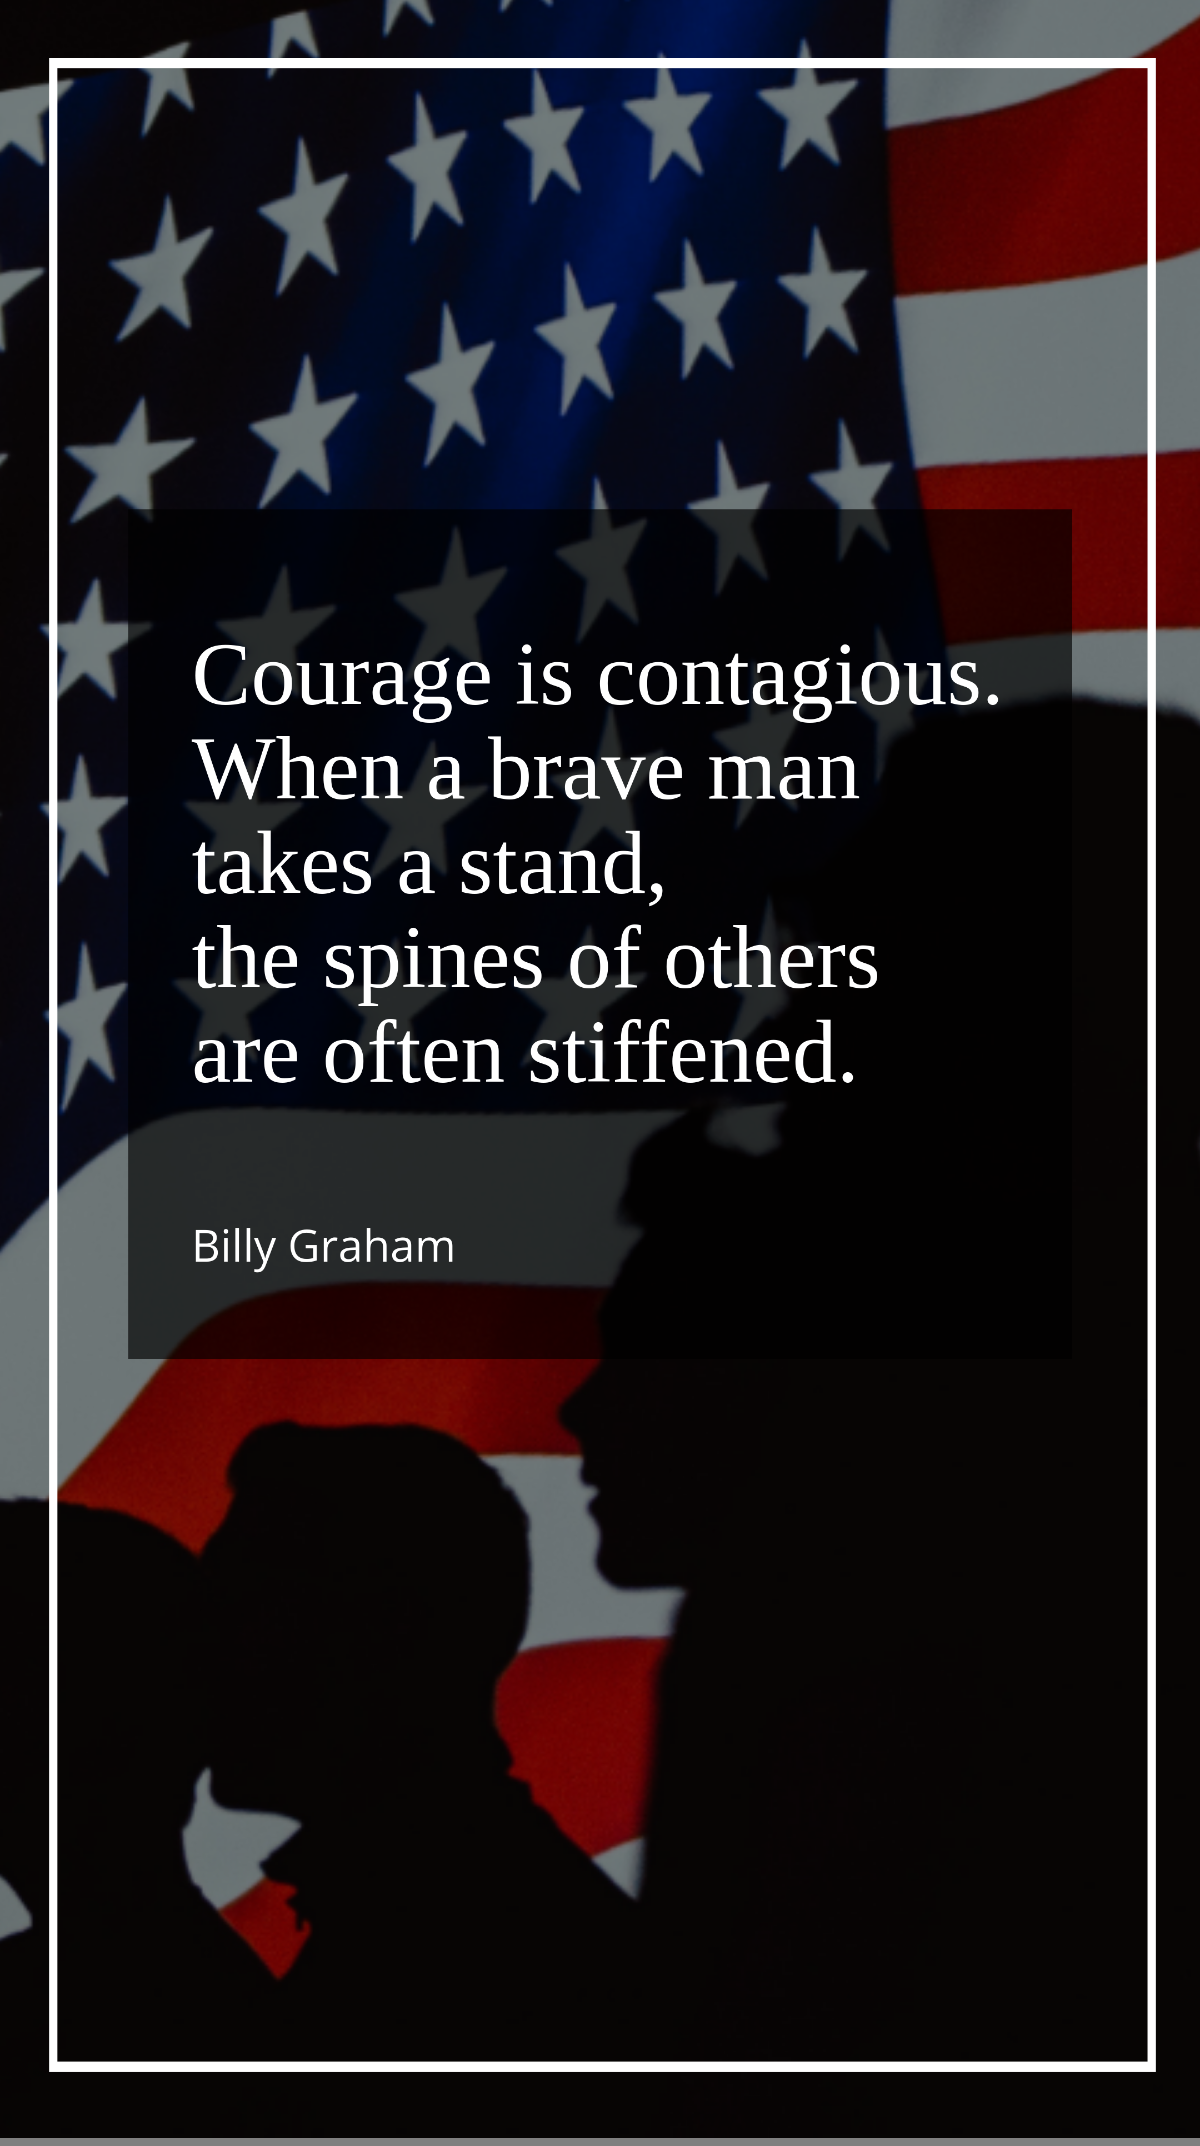 Billy Graham - Courage is contagious. When a brave man takes a stand, the spines of others are often stiffened. Template